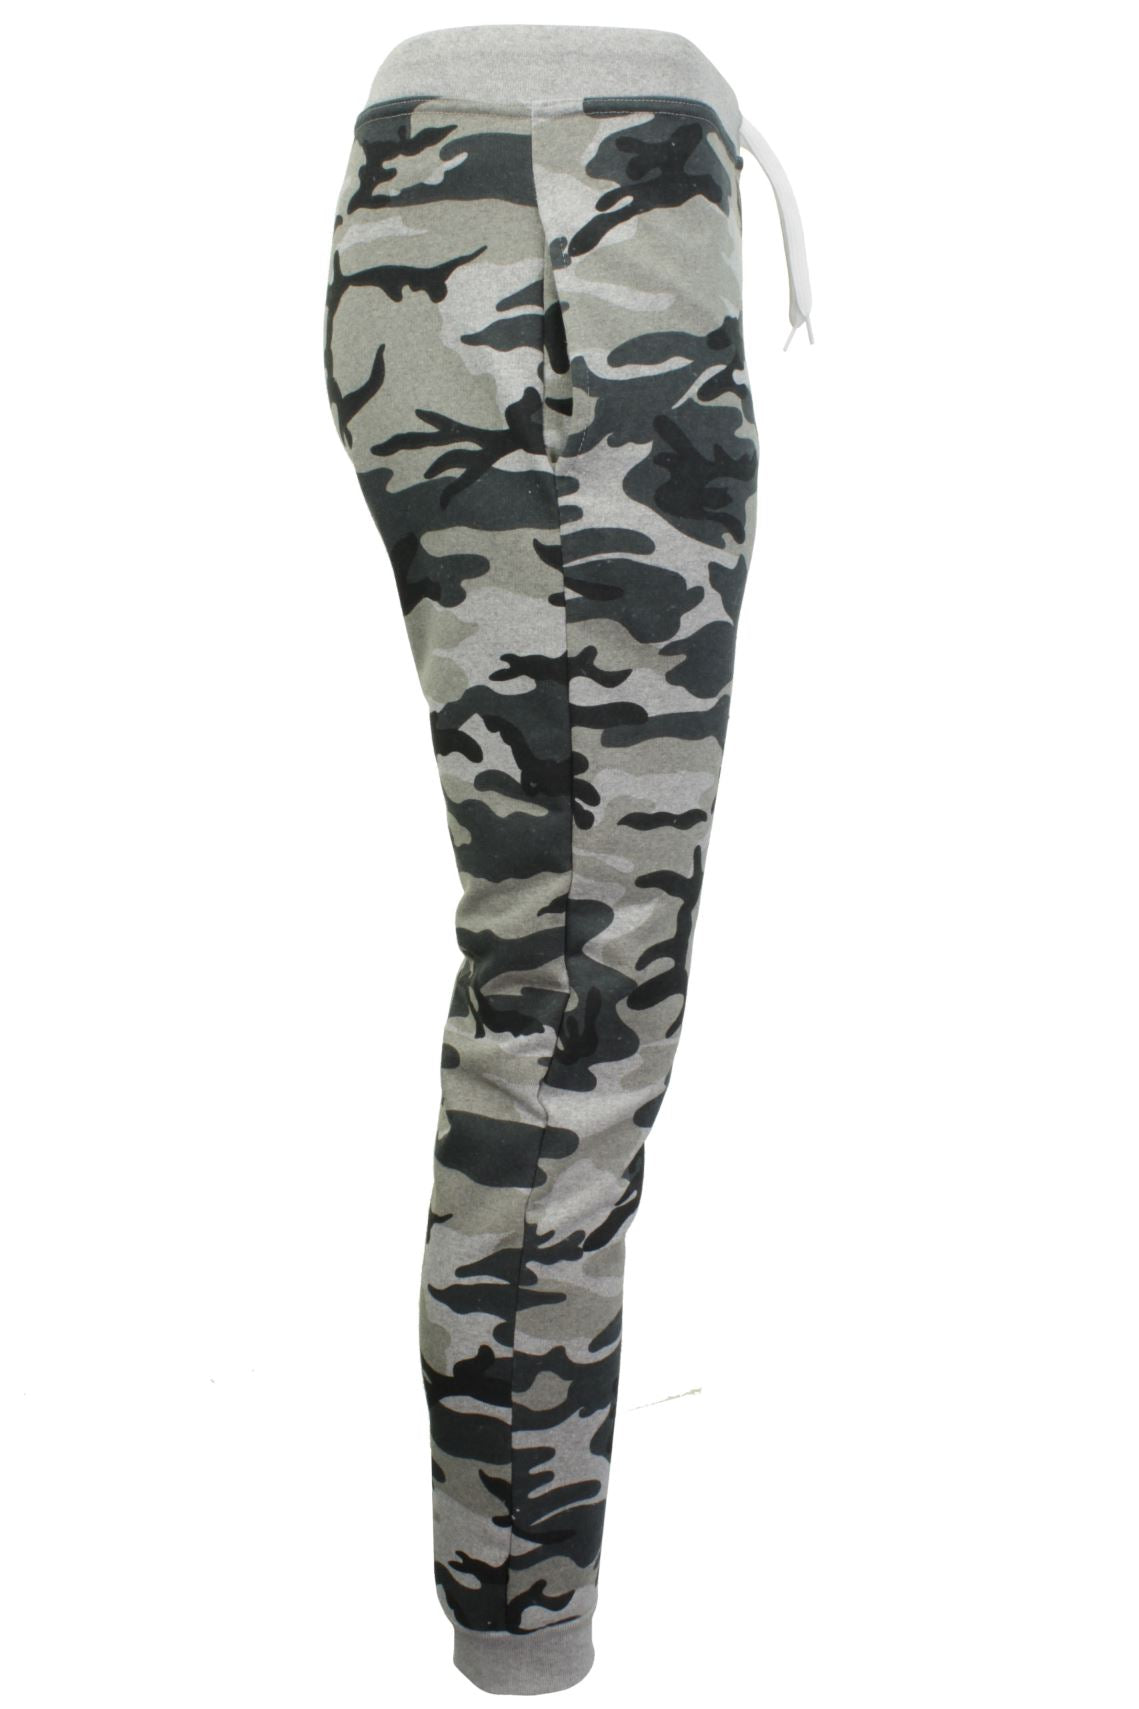 Mens Camouflage Print Joggers/ Gym Running Pants - Skinny Fit - by Xact, 02, Xjg-0002_Camo, Grey